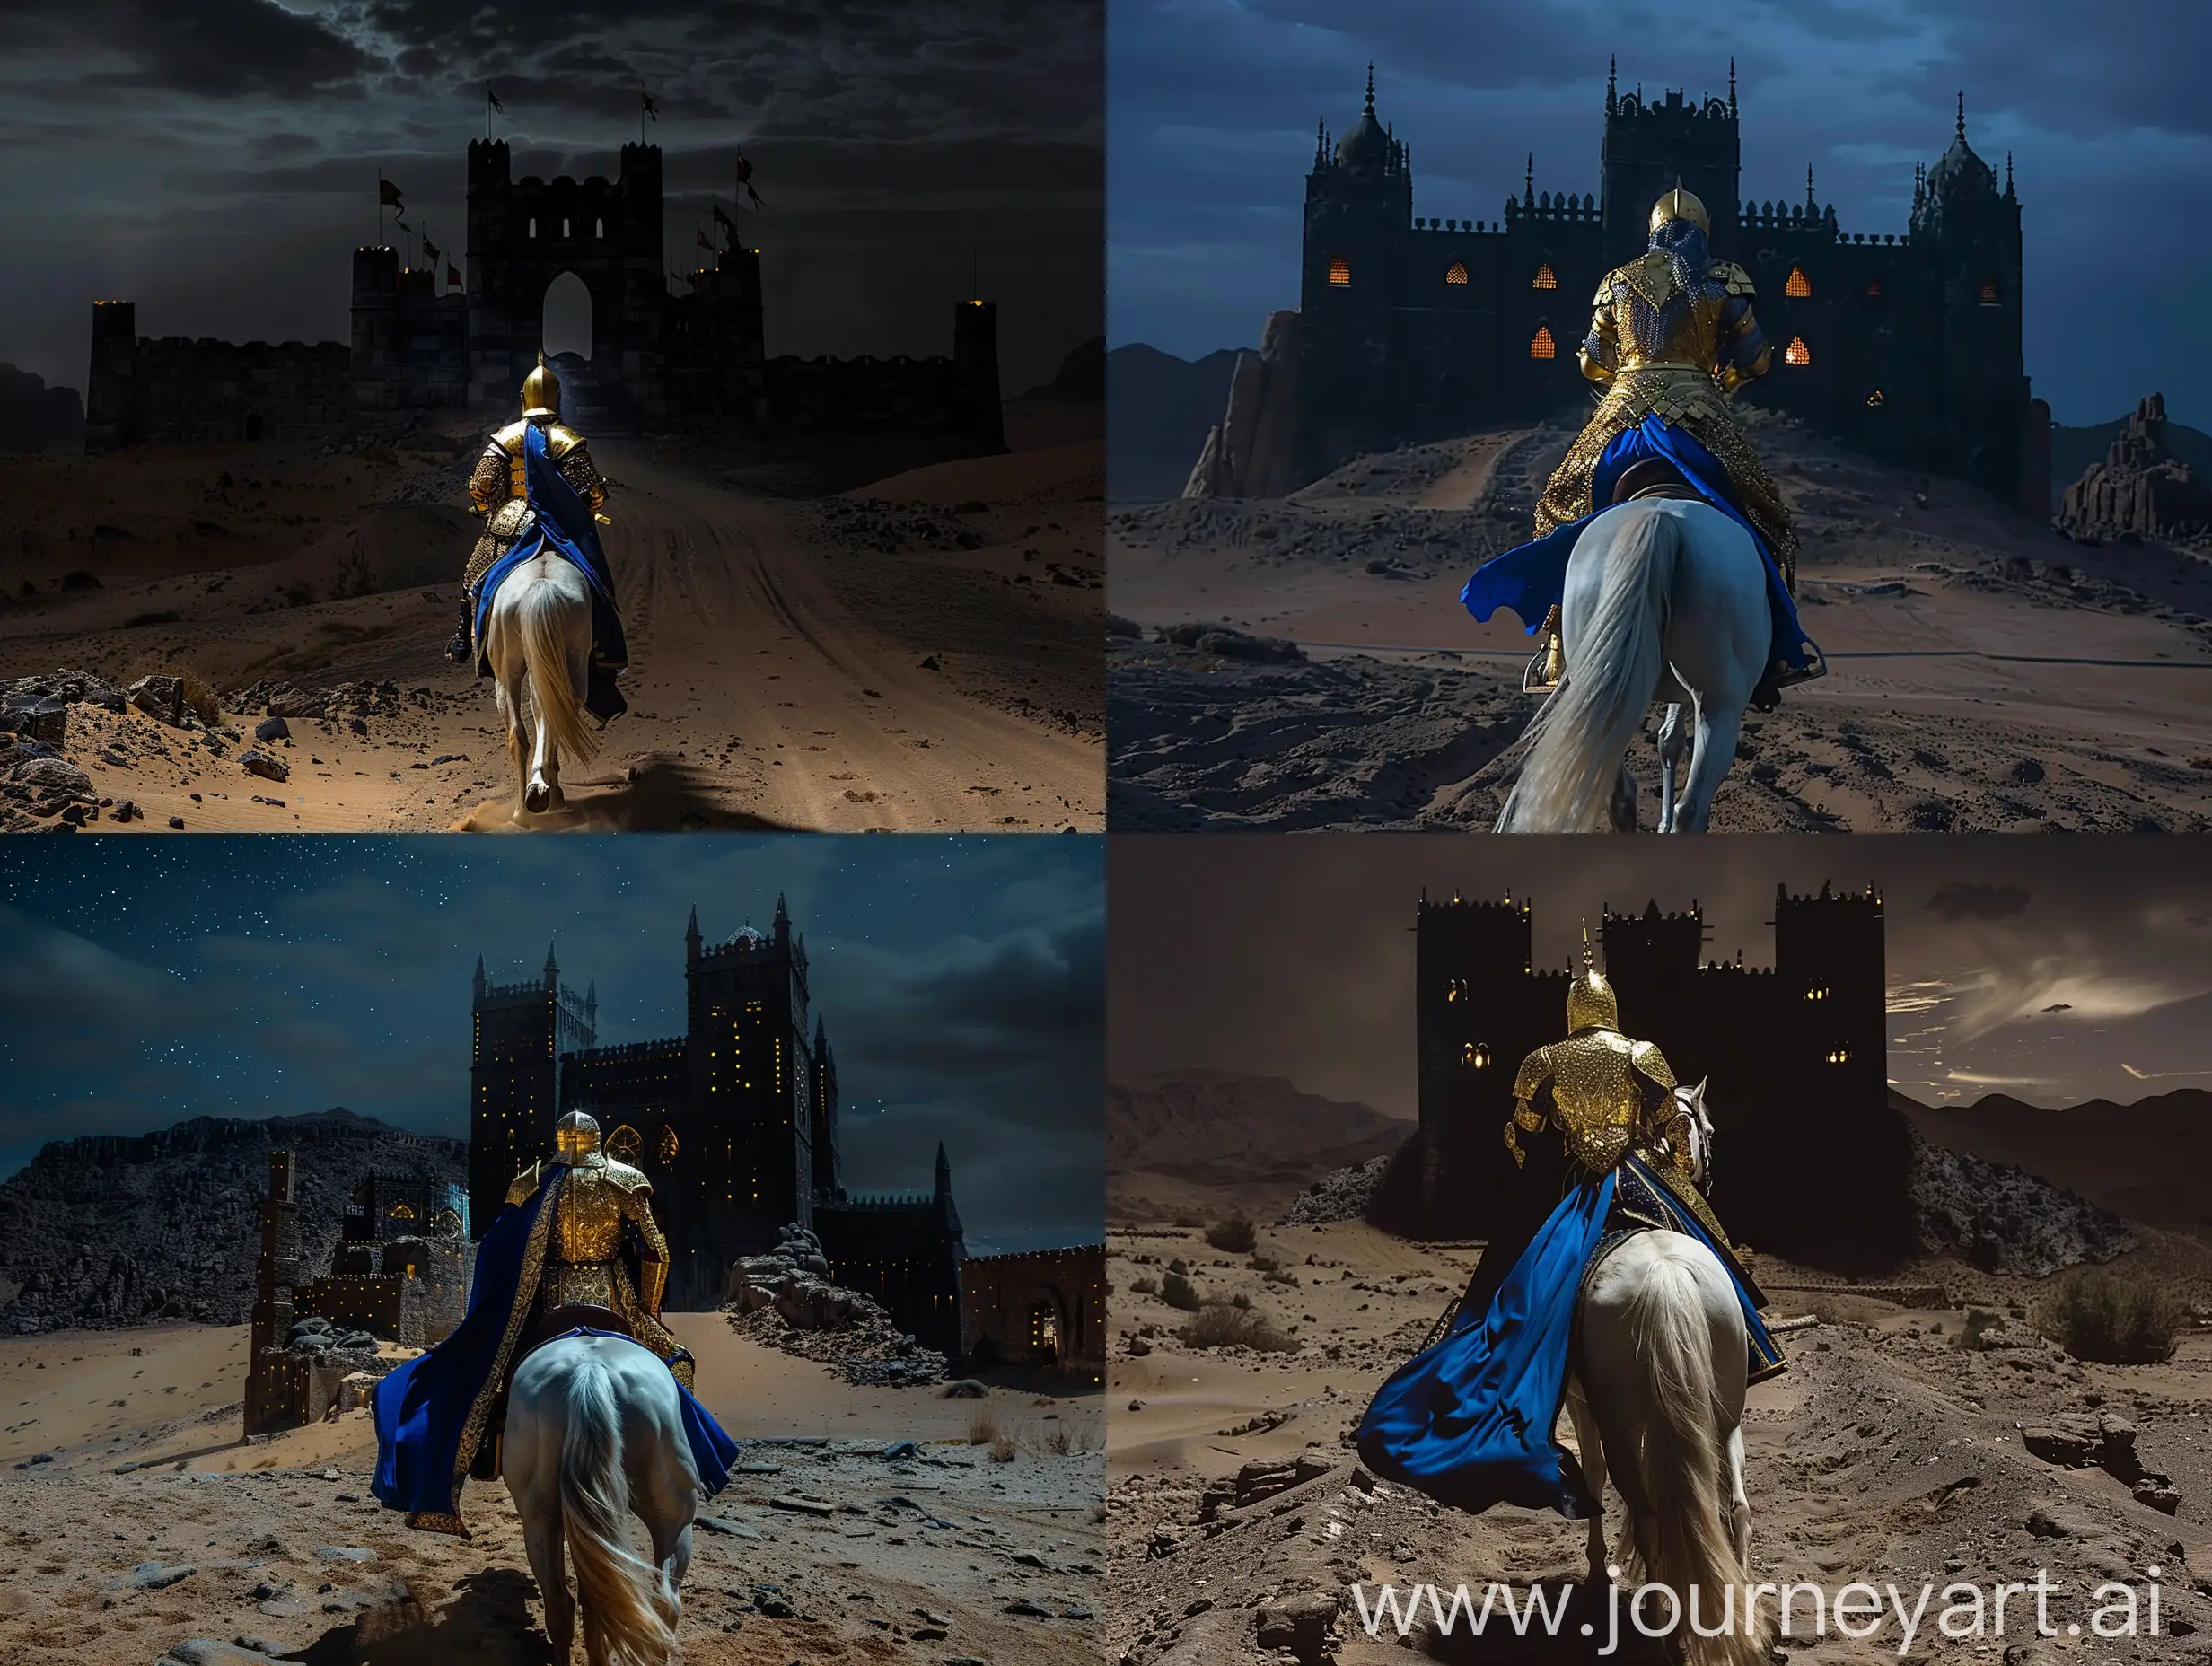 Full shot of a man in golden armor and blue dress riding a white horse entering a black castle in the middle of the desert at night, angle shot from behind the man, cinematic lighting